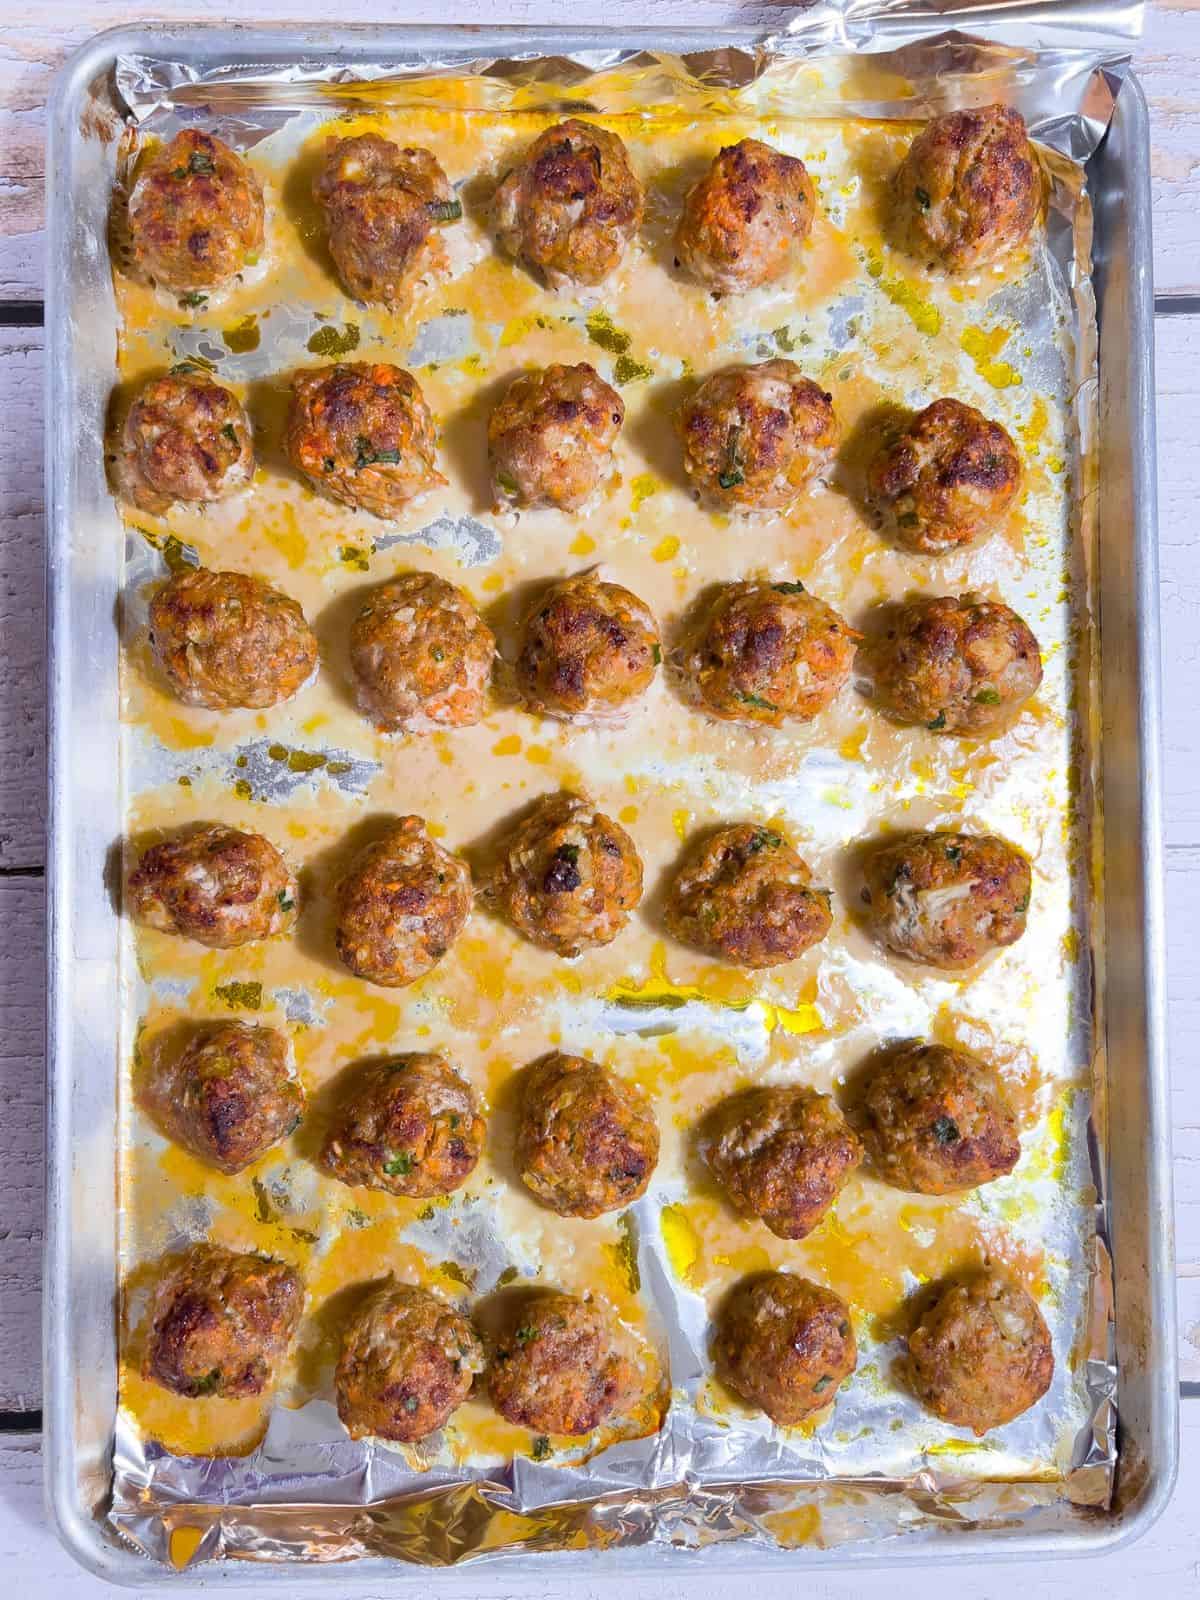 Baked turkey and sausage meatballs on a tray.